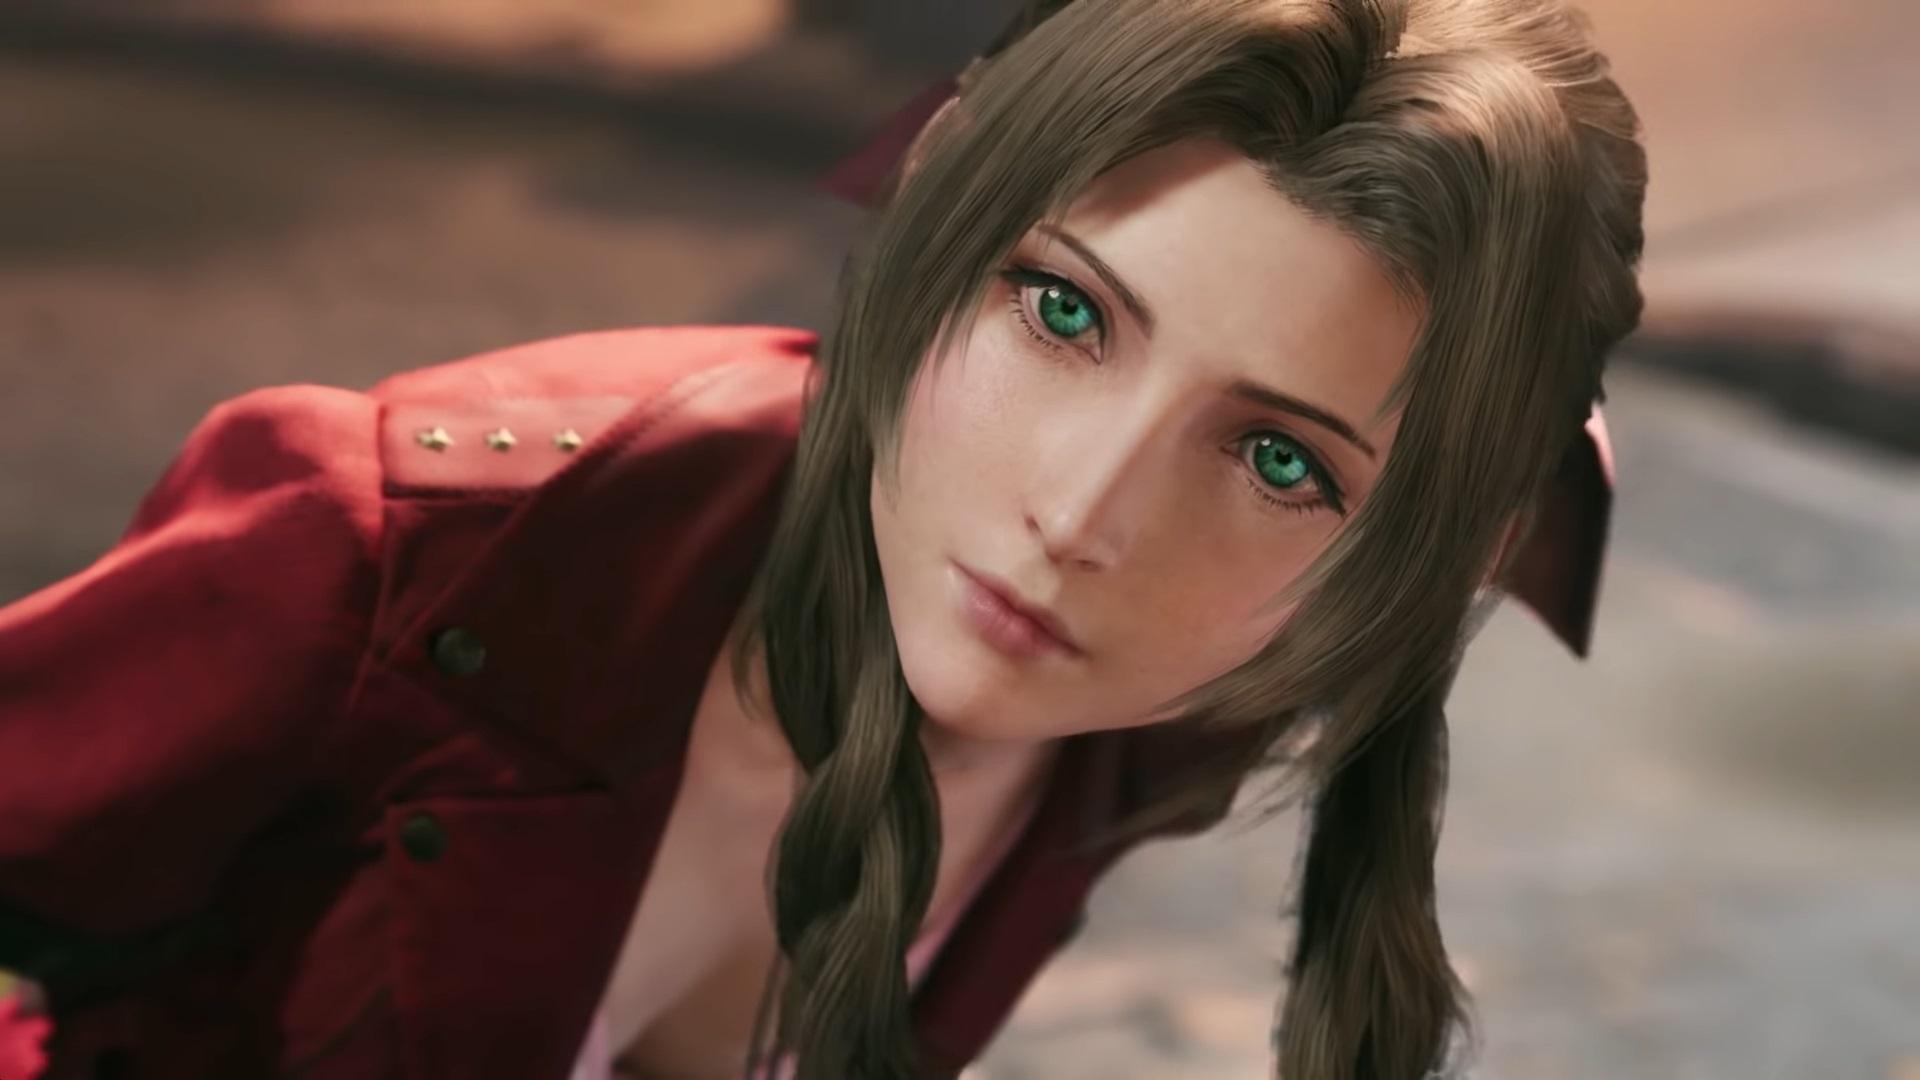 Square Enix has no plans to release Final Fantasy 7 on other